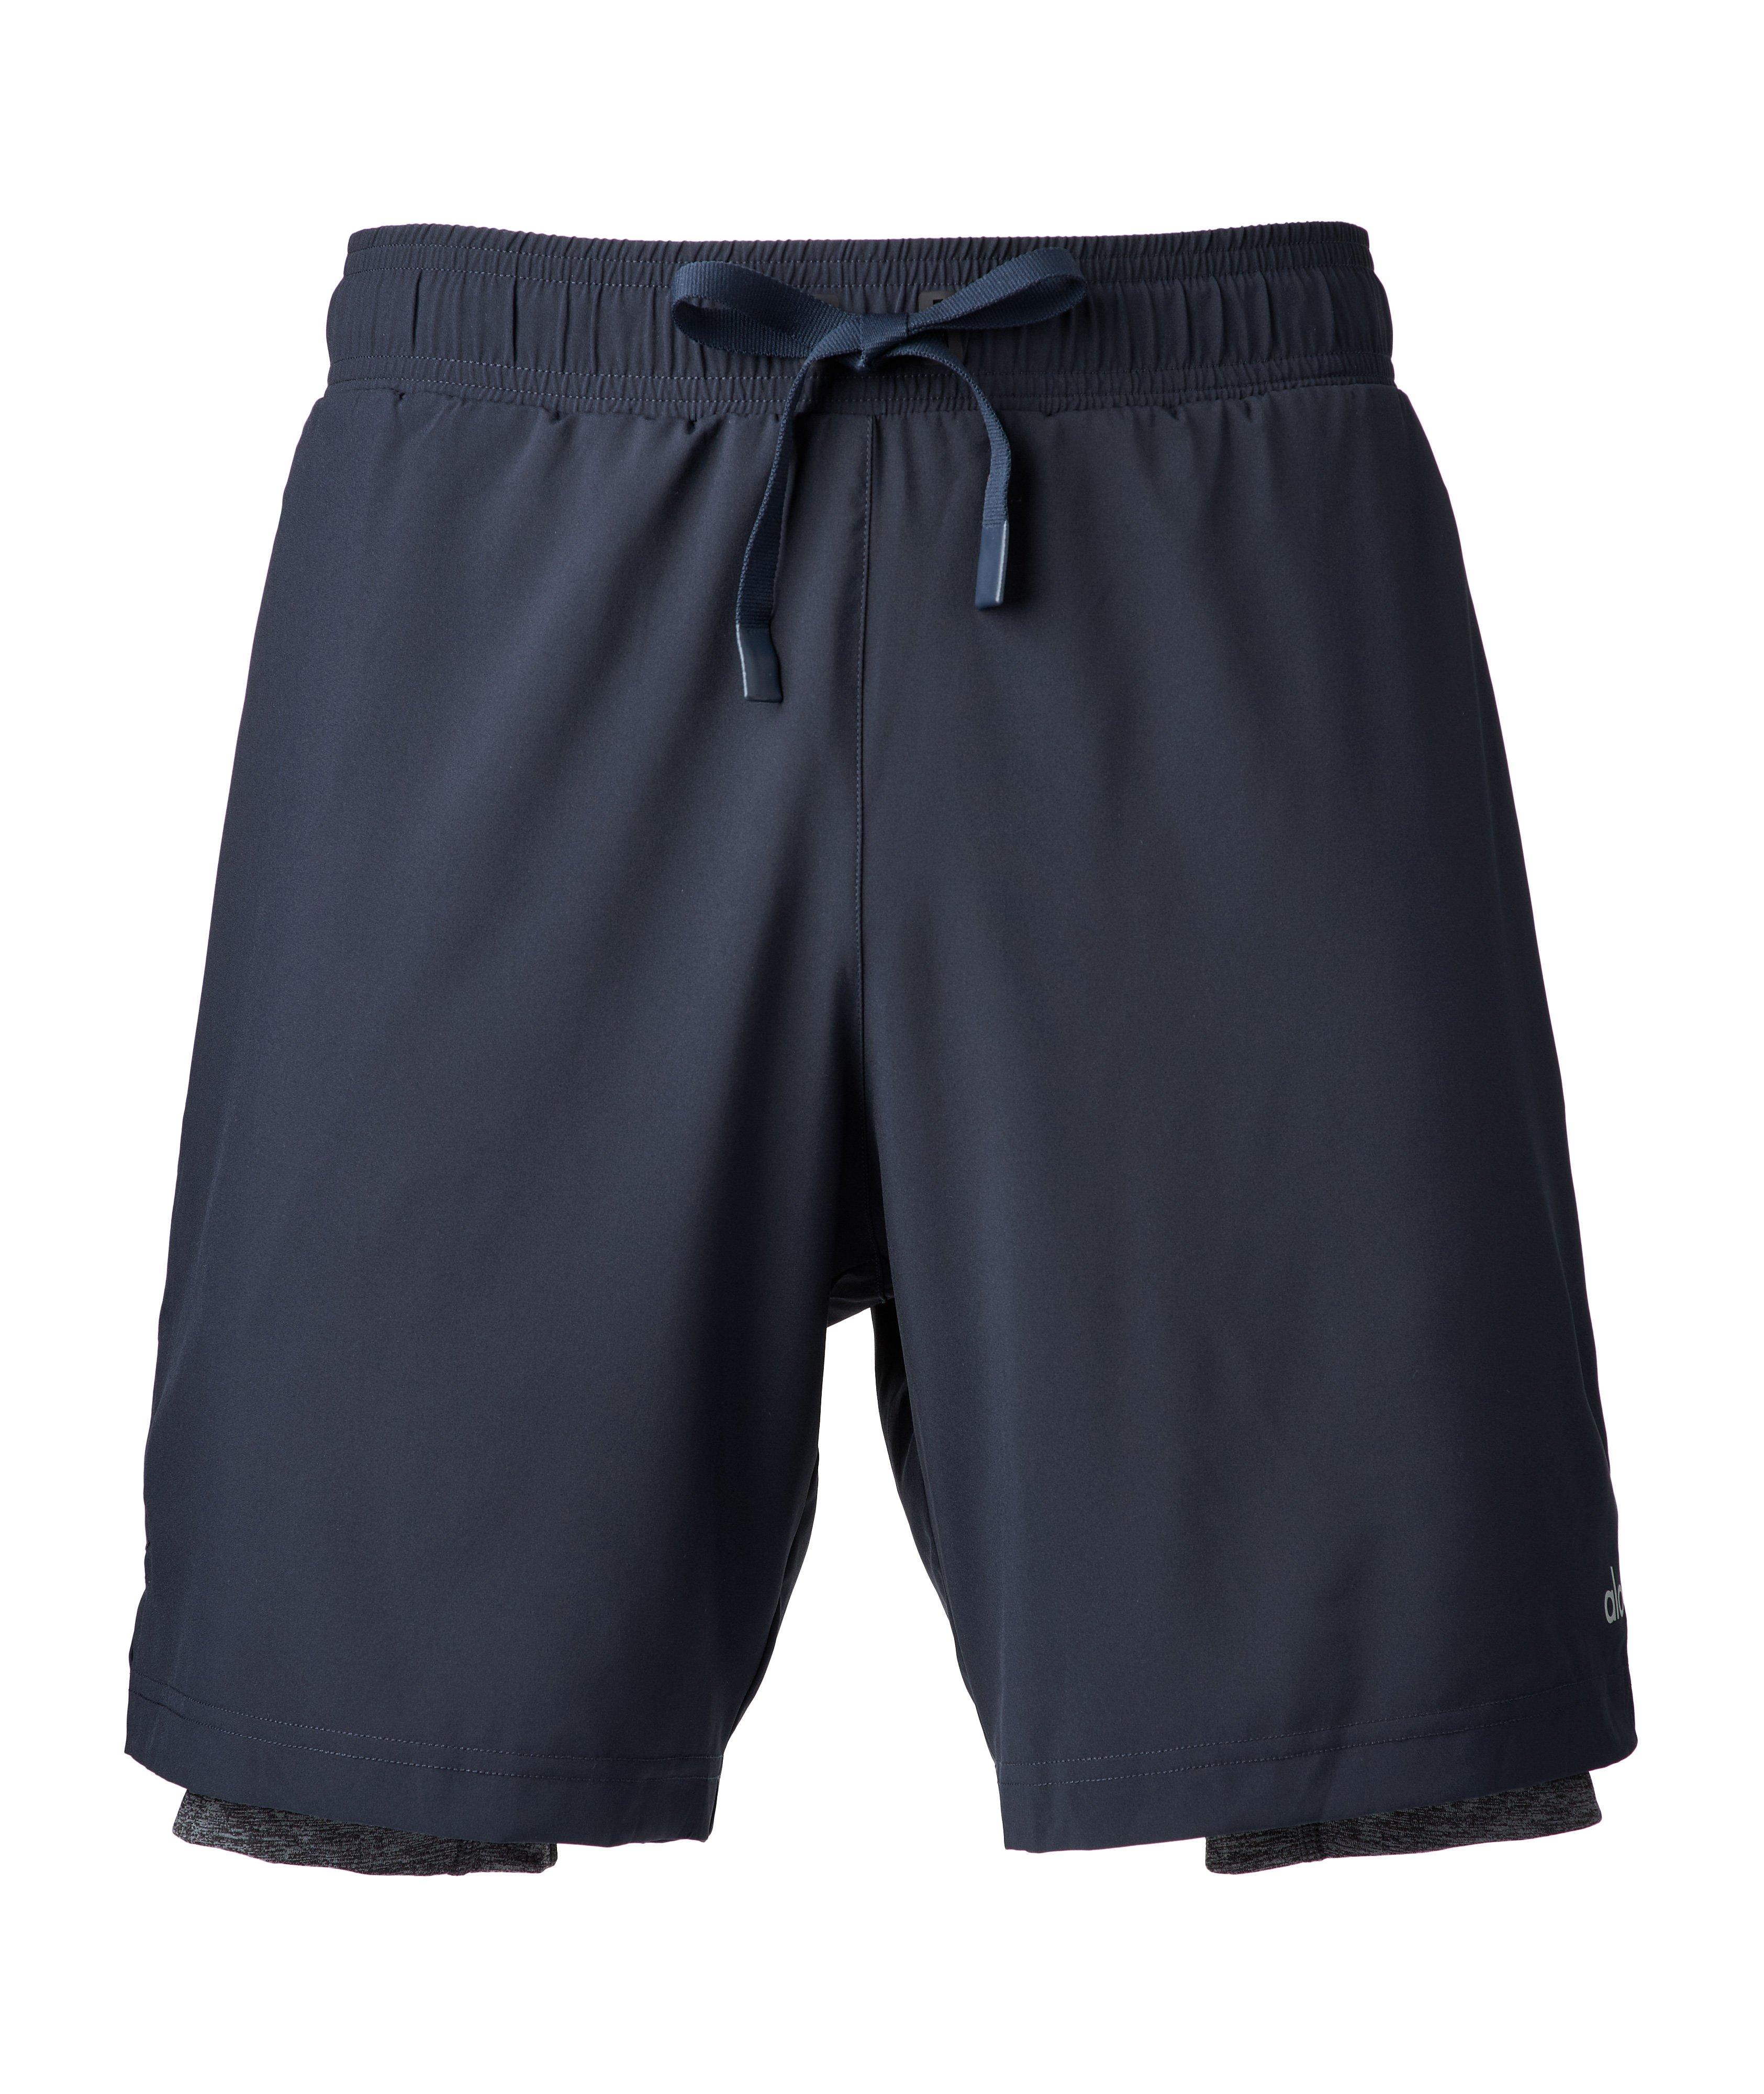 Unity 2-In-1 Stretch Shorts image 0